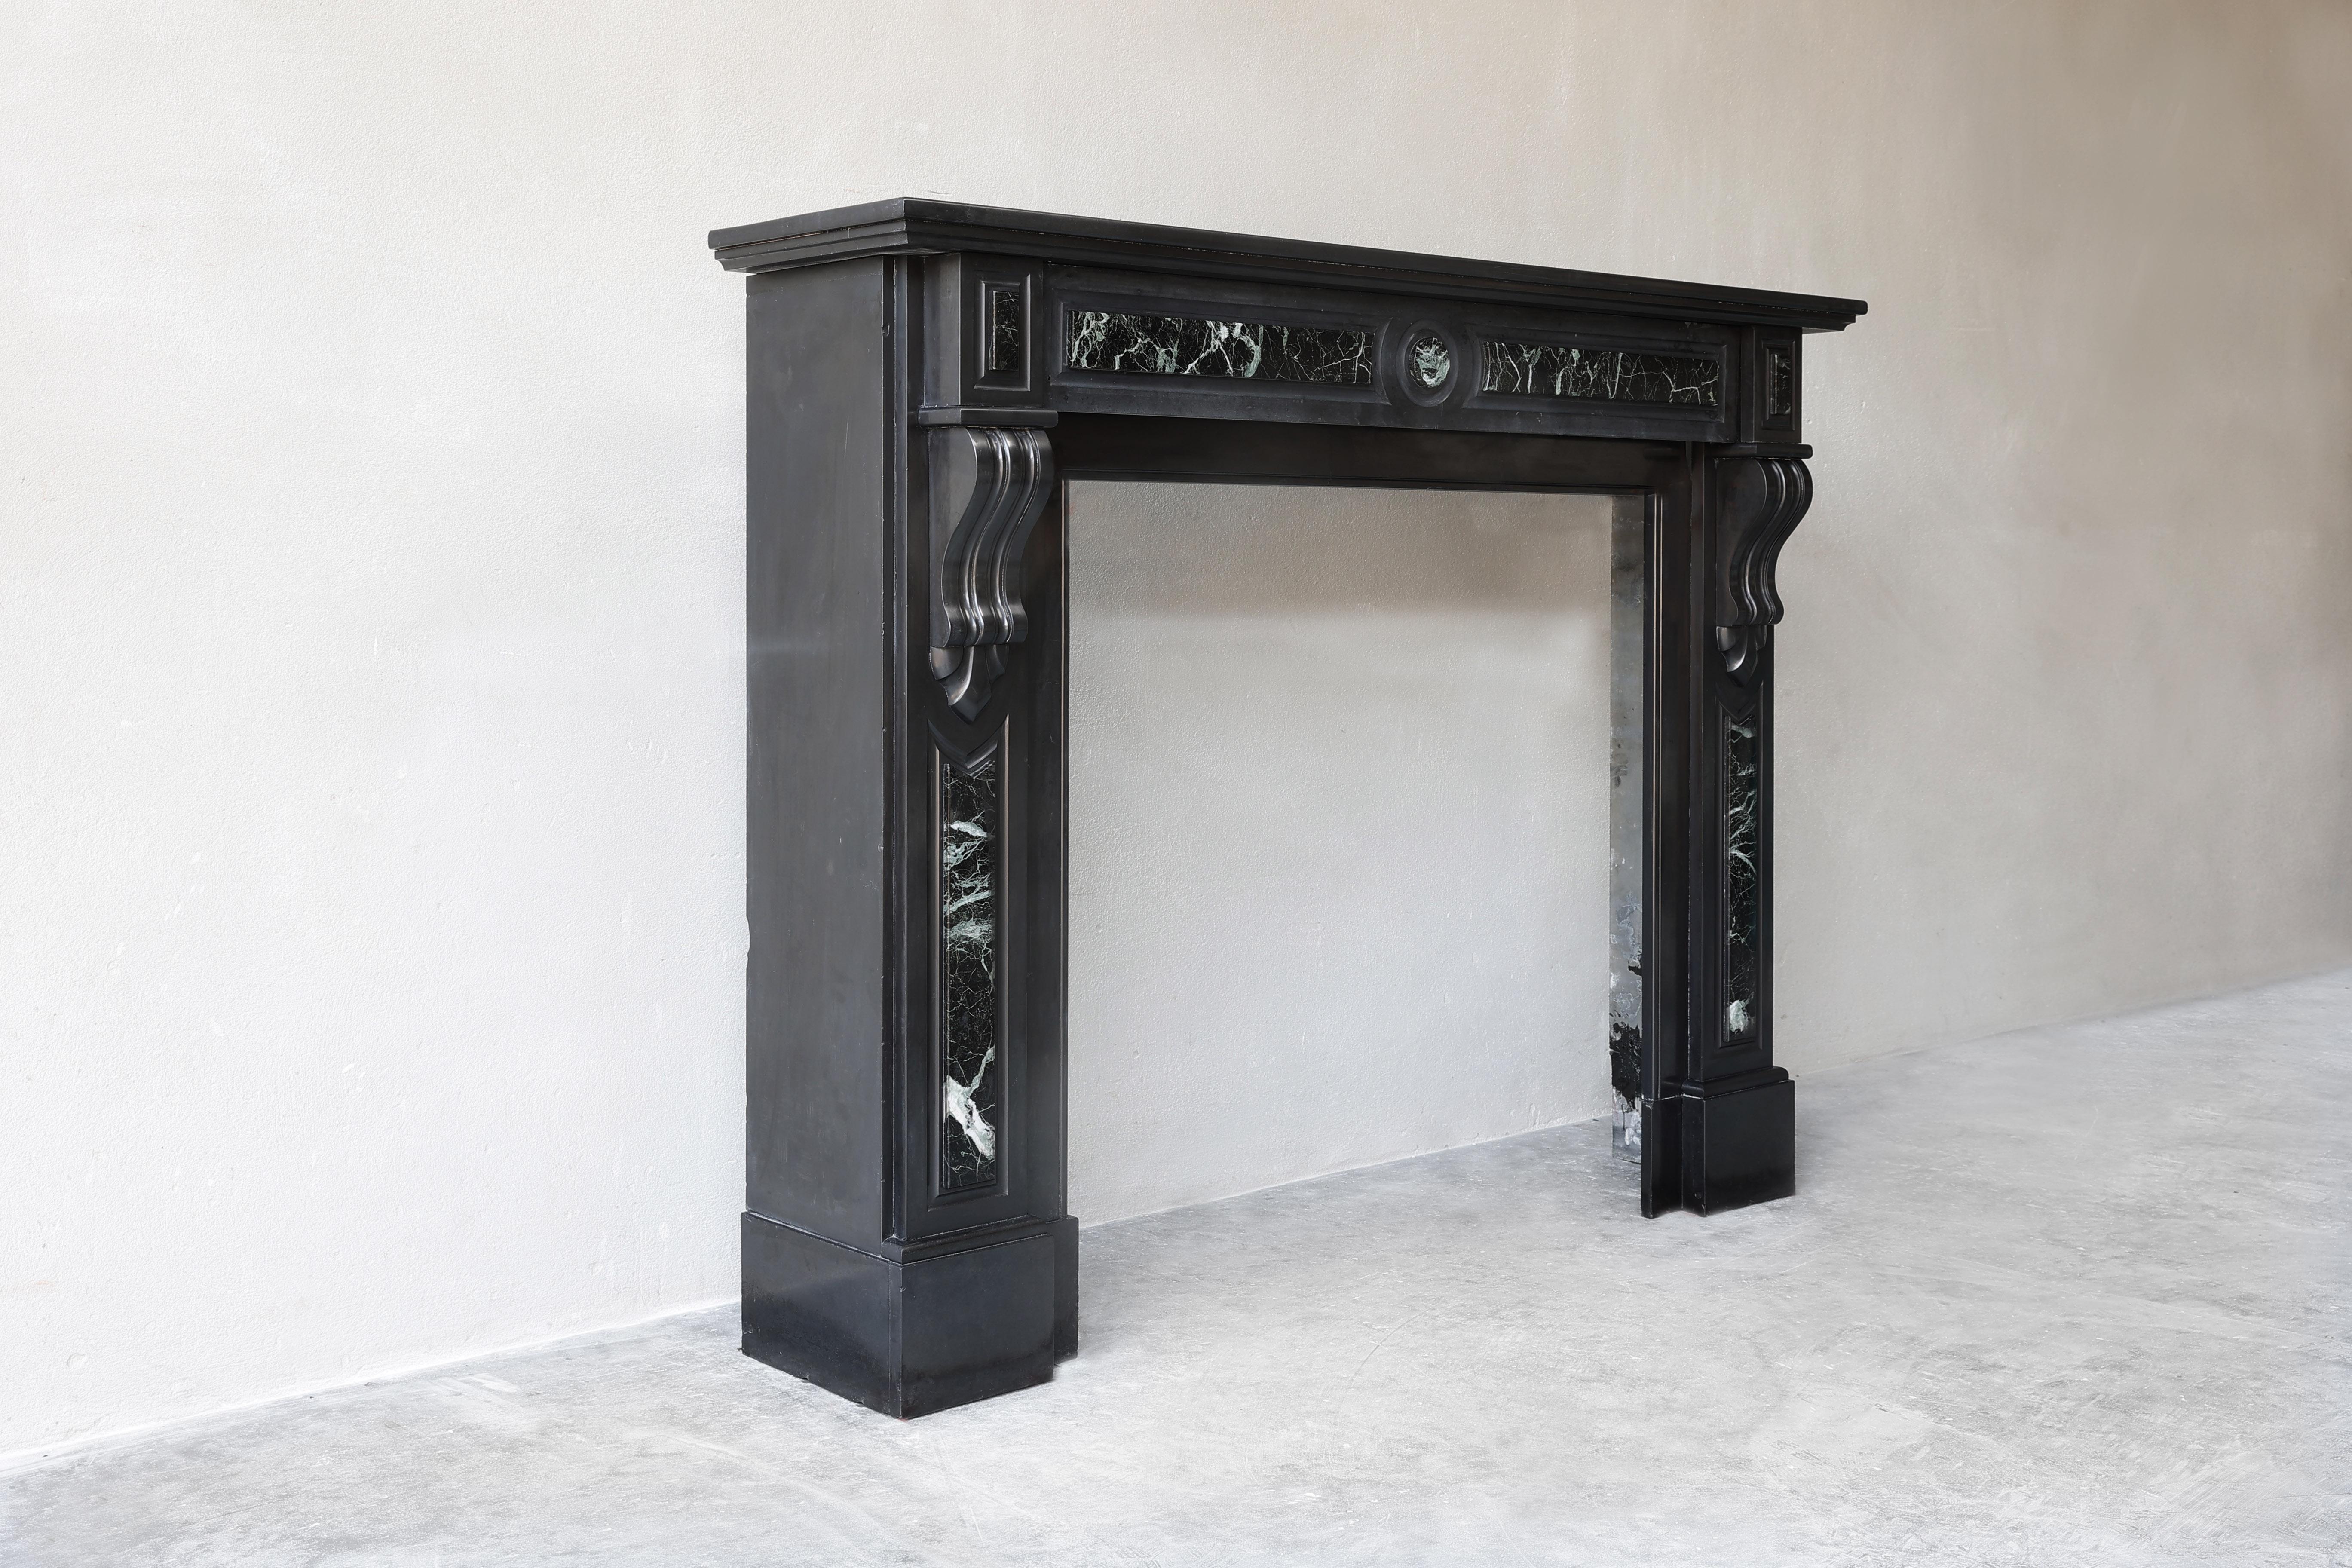 Beautiful ornate fireplace made of Noir de Mazy marble with green verde marble. A beautiful model in terms of size and shape. This fireplace is in Louis XVI style and dates from the 19th century. This type of fireplace fits perfectly in both a